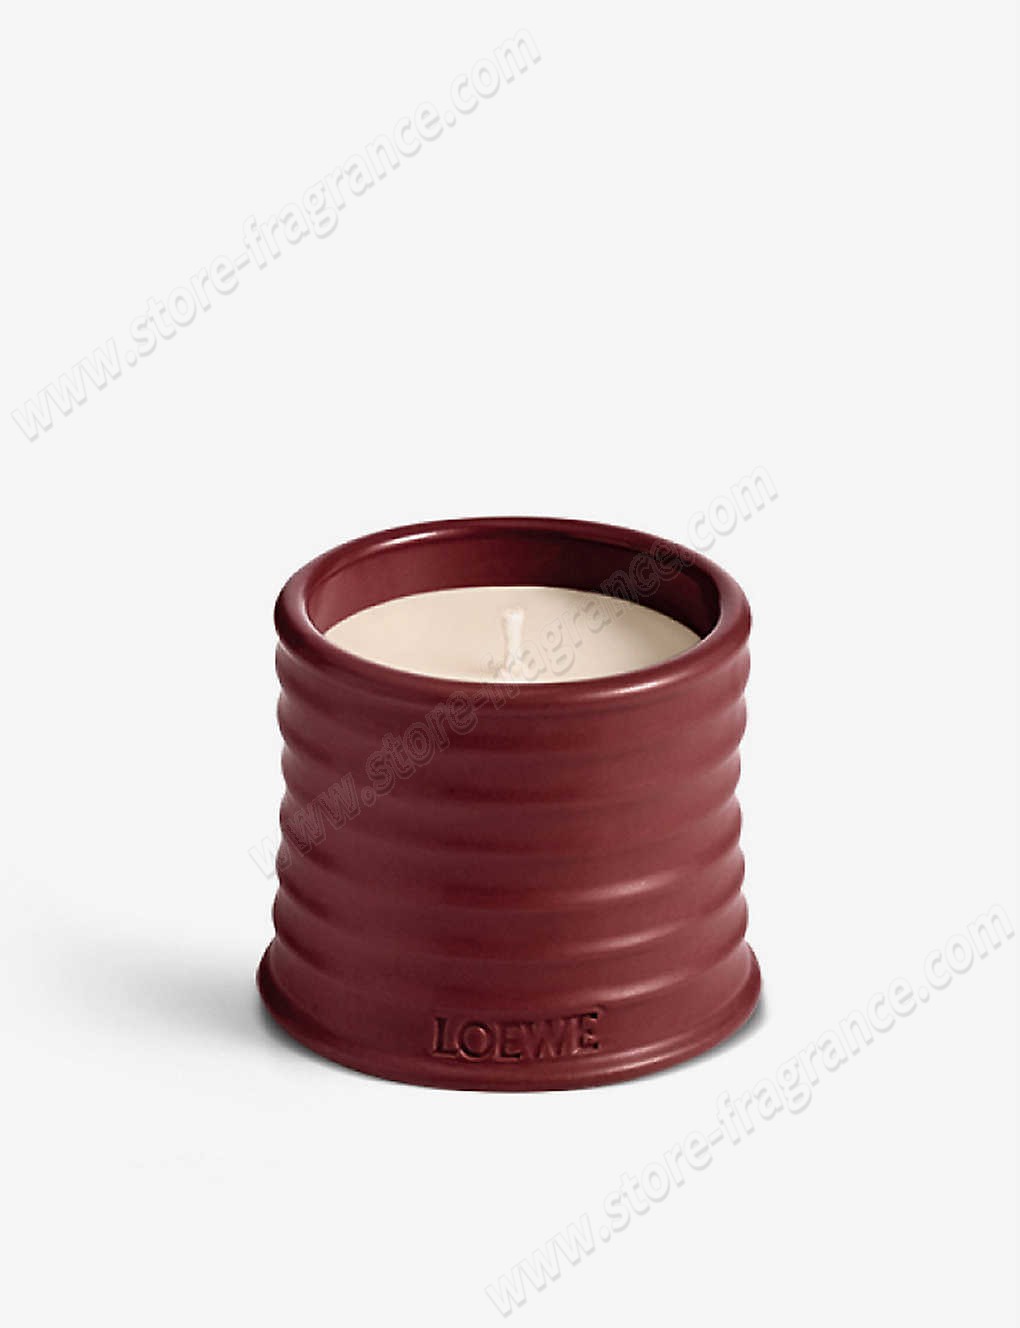 LOEWE/Beetroot small scented candle 170g ✿ Discount Store - LOEWE/Beetroot small scented candle 170g ✿ Discount Store